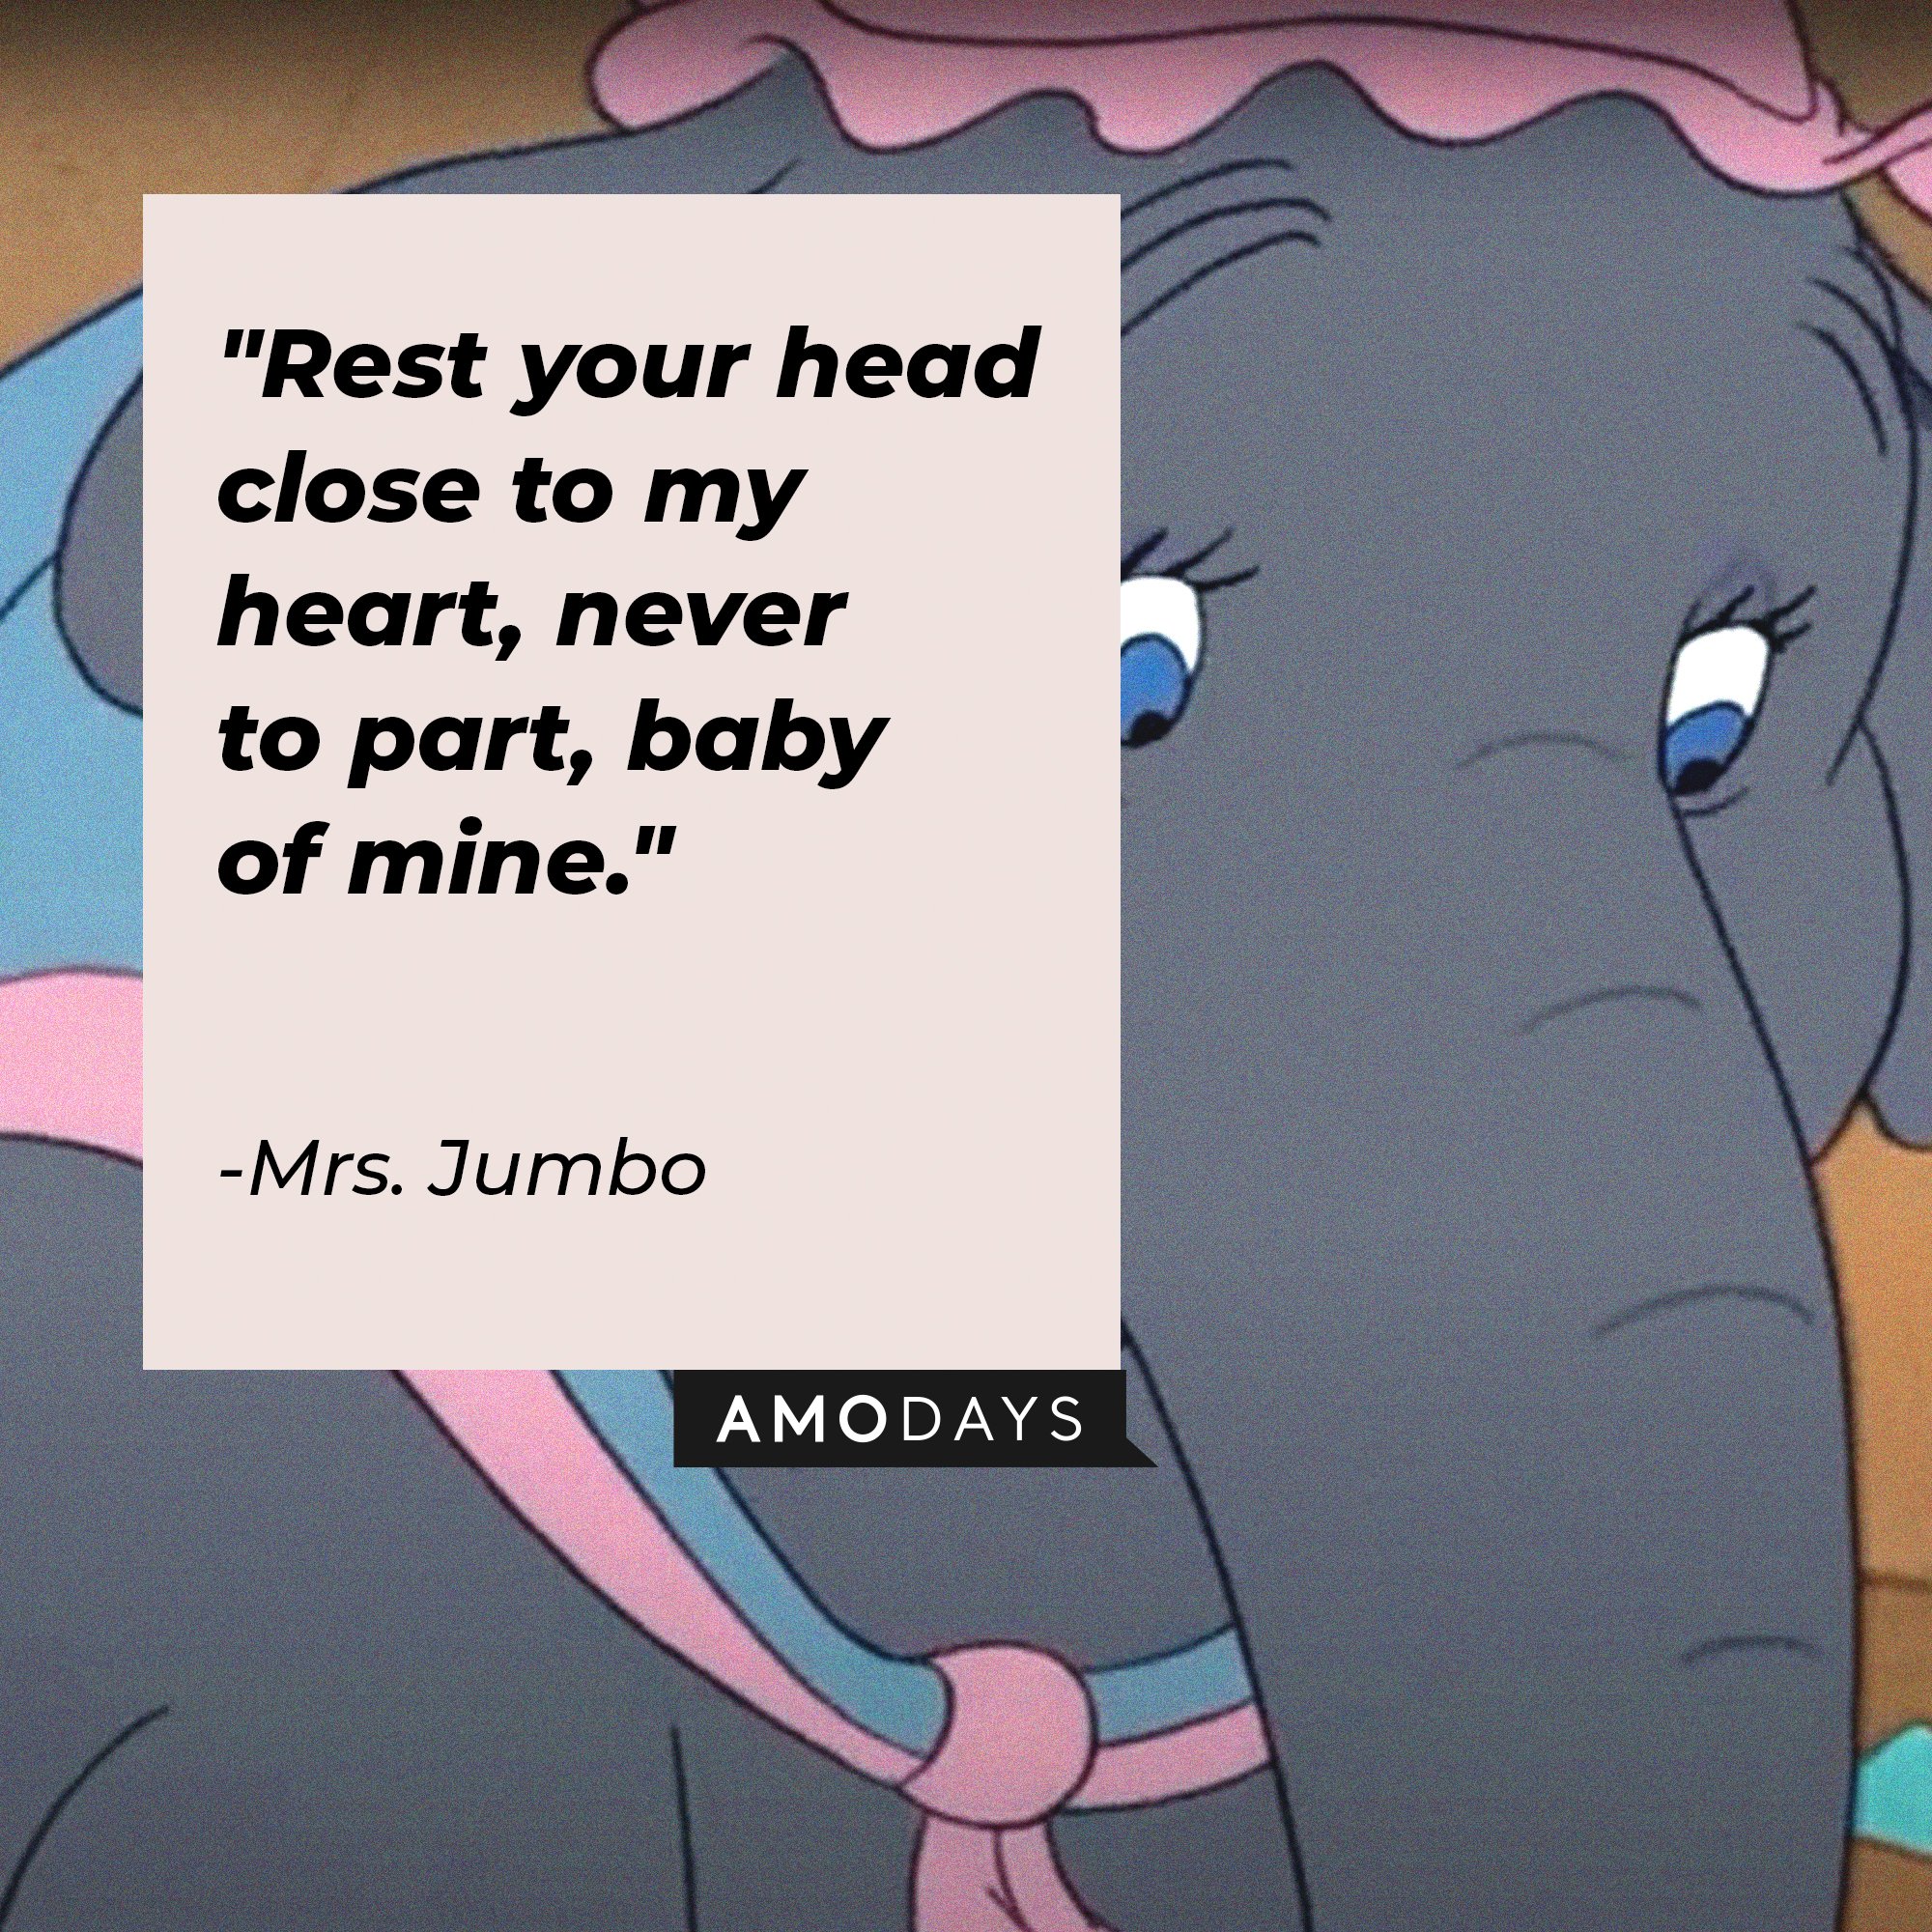 Mrs. Jumbo’s quote: "Rest your head close to my heart, never to part, baby of mine." | Image: AmoDays